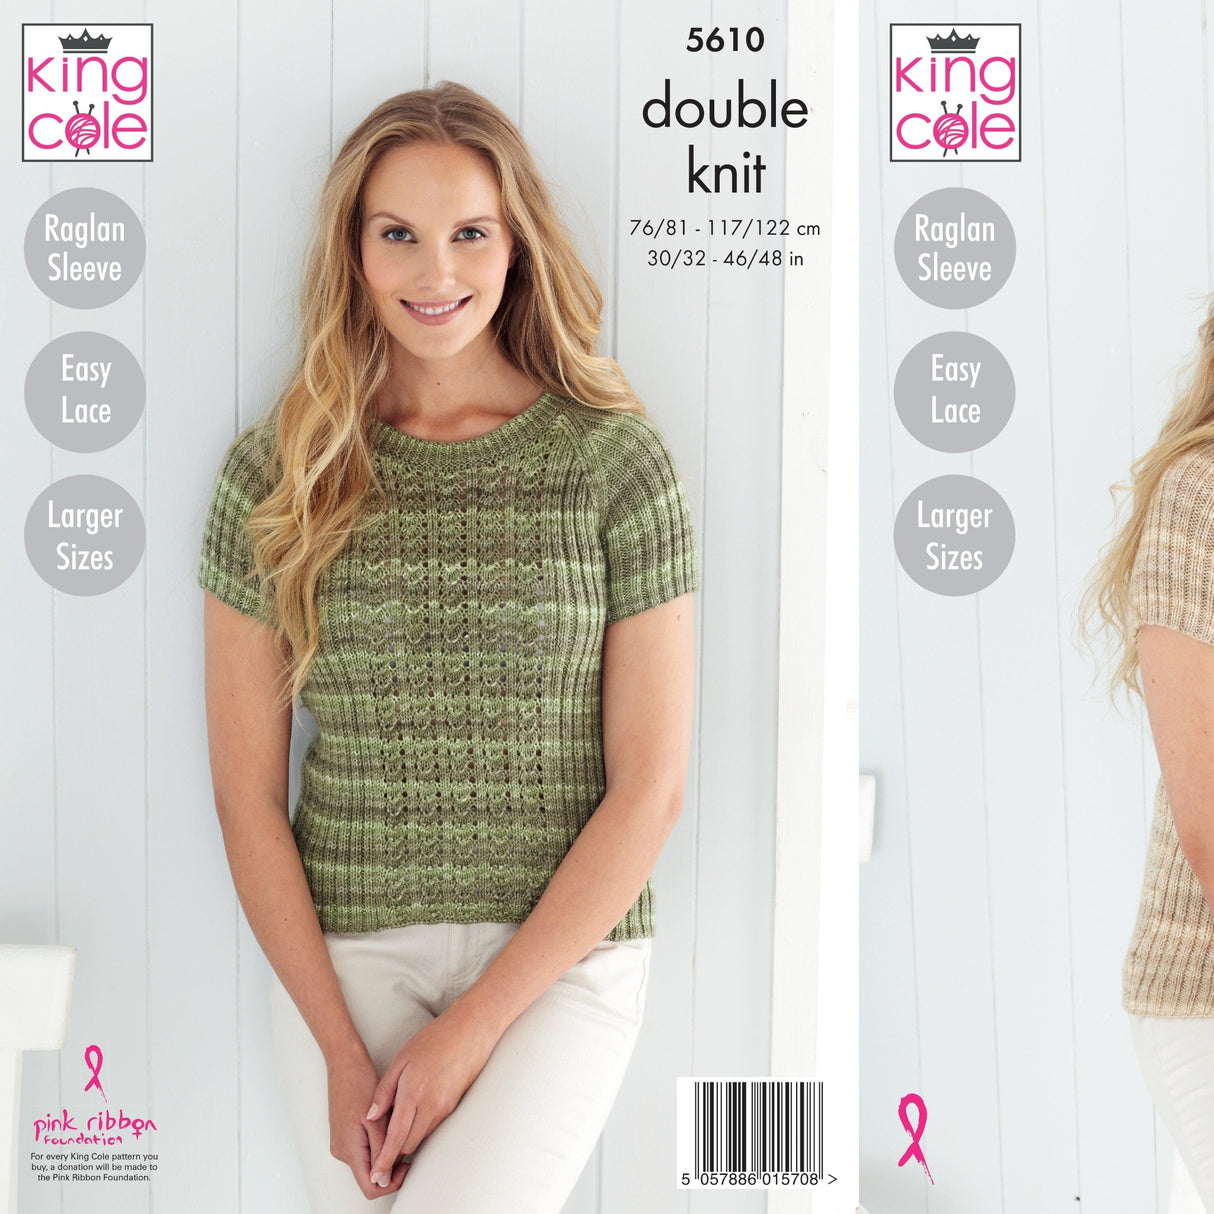 King Cole Patterns King Cole Ladies Sweater and Cardigan DK Knitting Pattern 5610